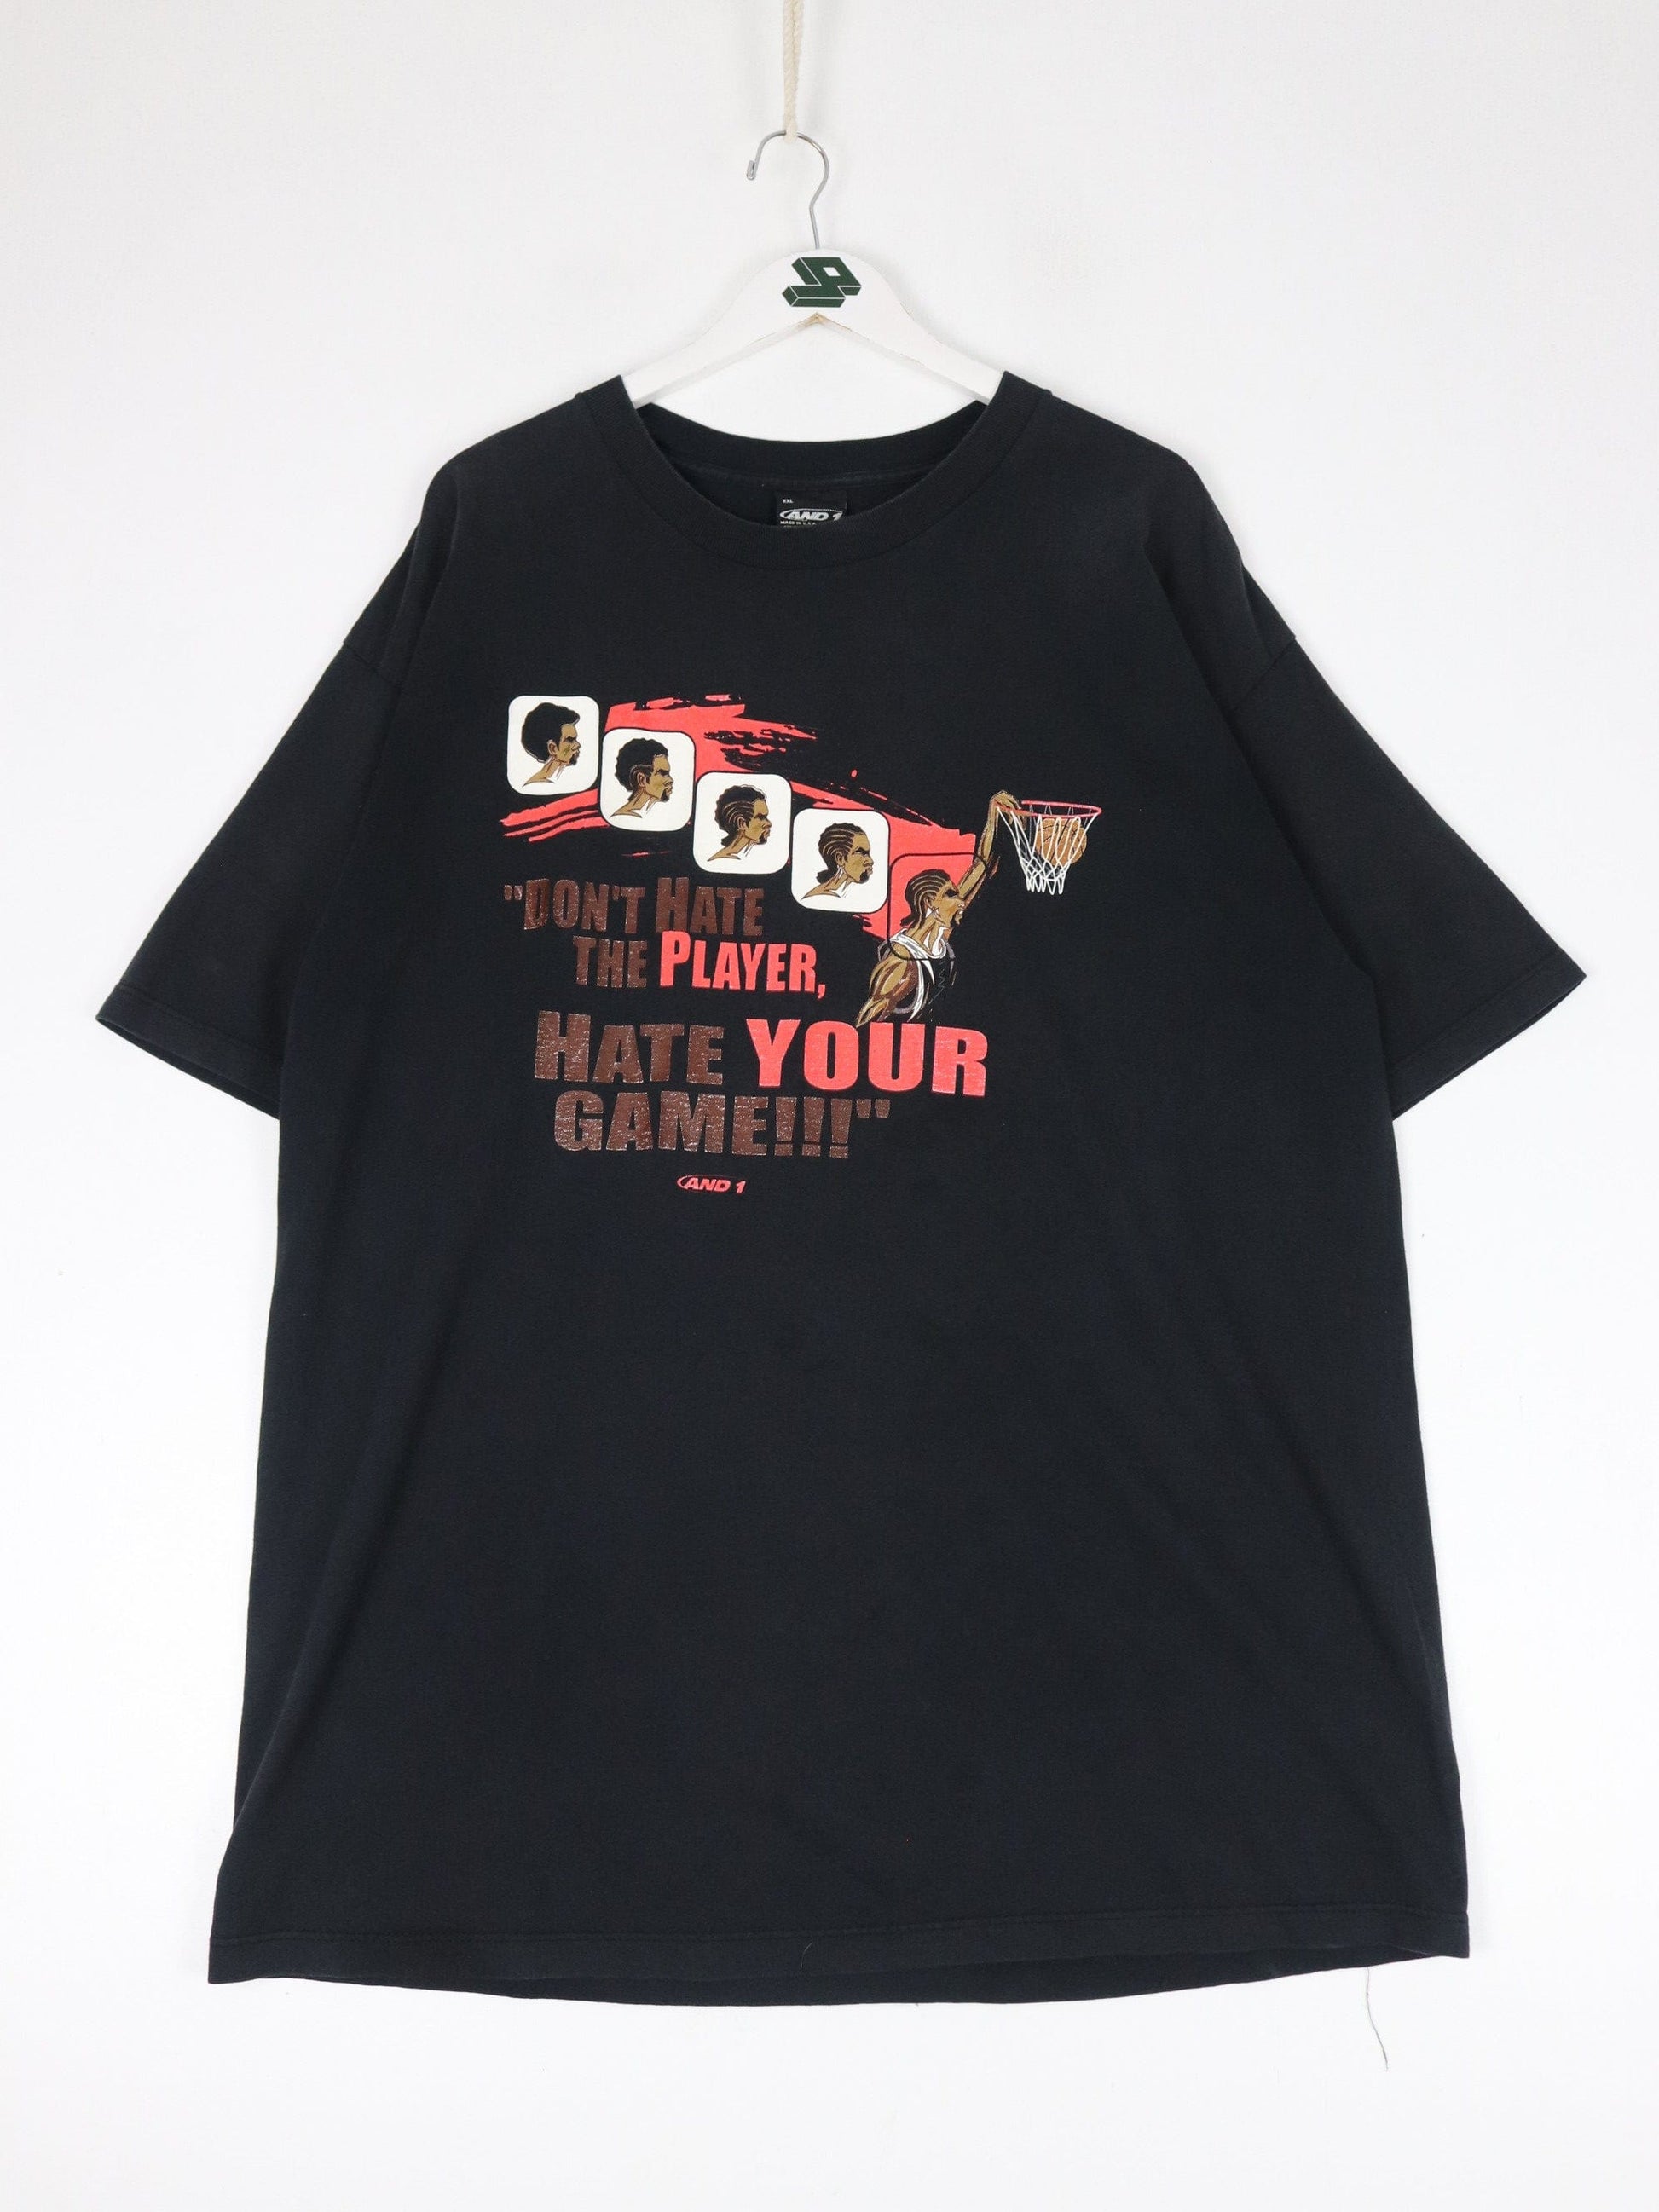 Other T-Shirts & Tank Tops Vintage And1 T Shirt Mens 2XL Black Hate Your Game Basketball Y2K